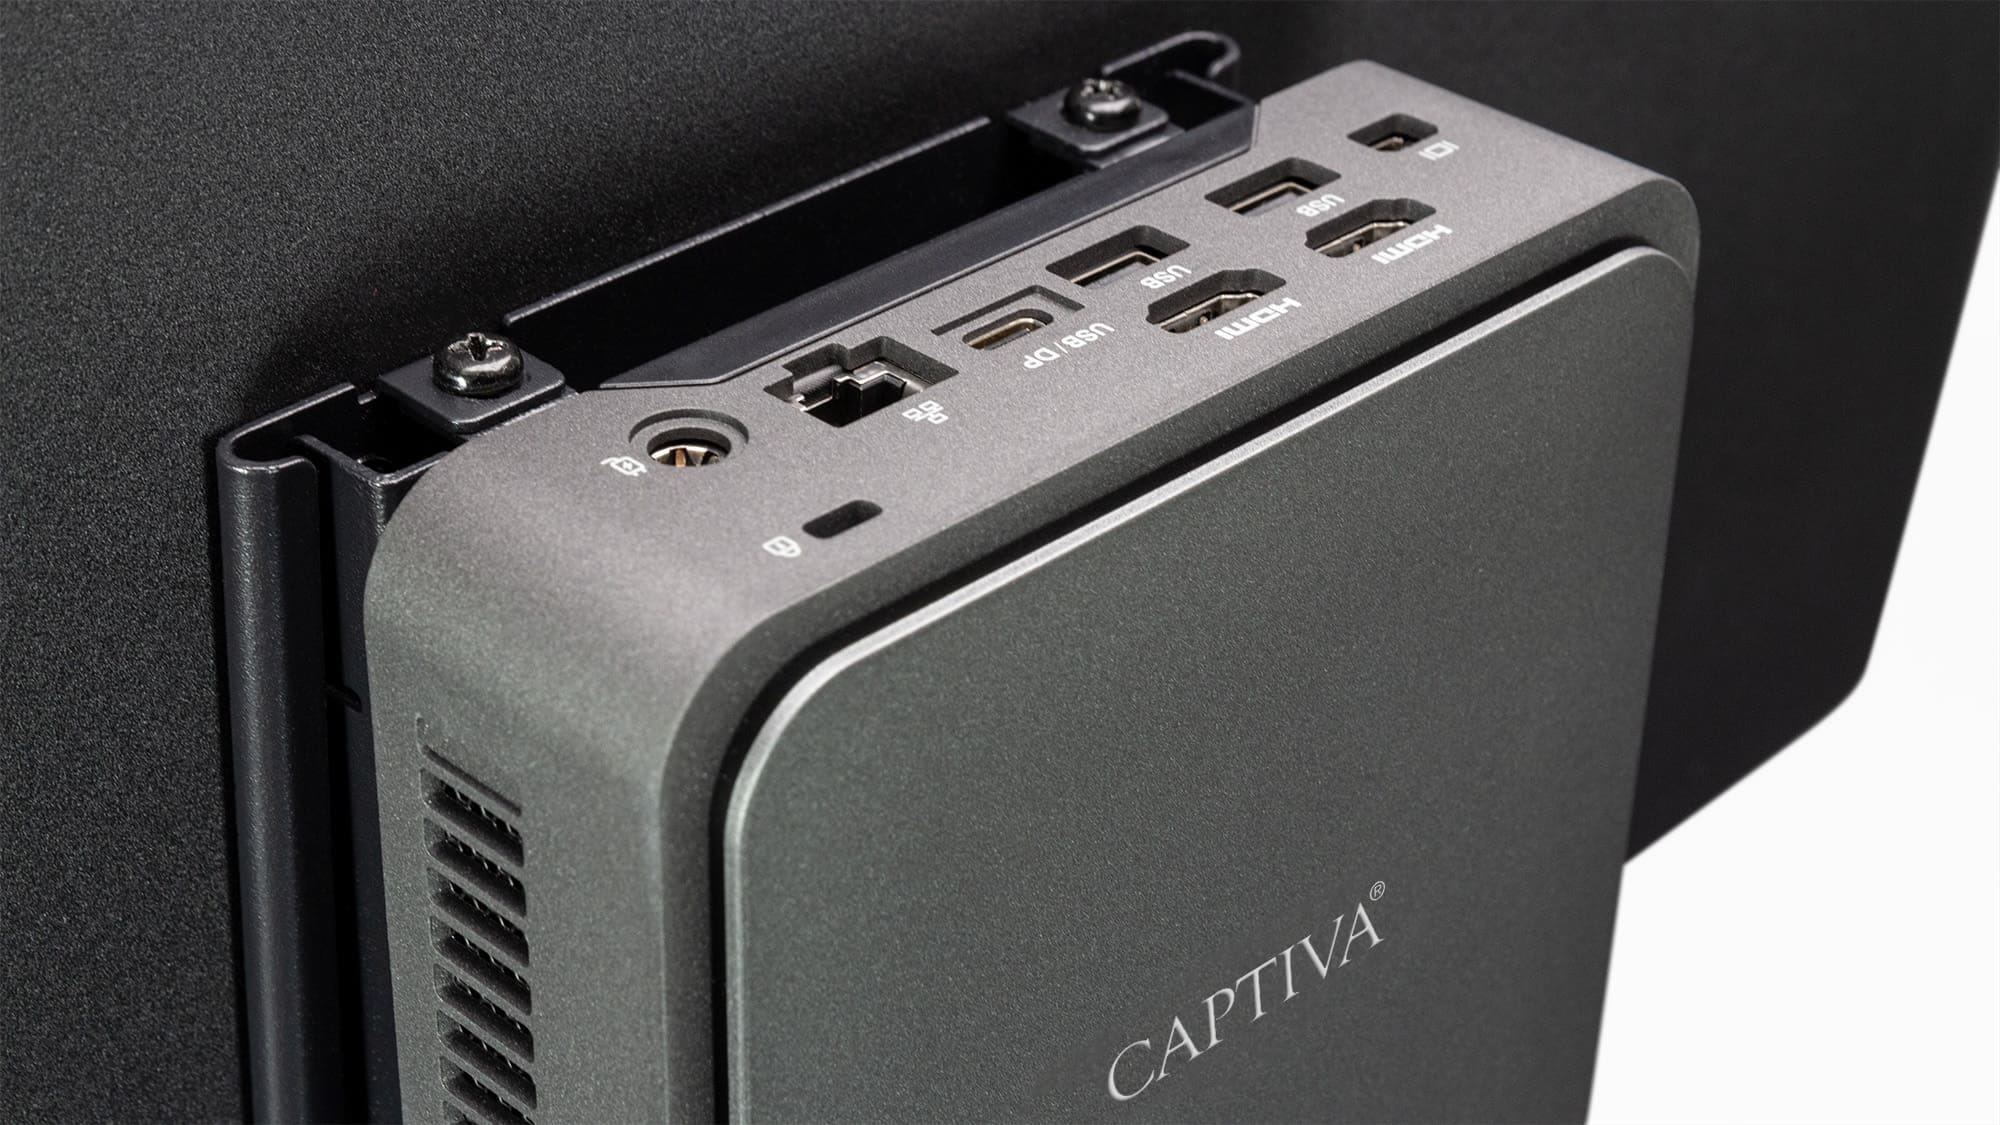 CAPTIVA All-in-One PC »All-In-One Power Starter I82-190«